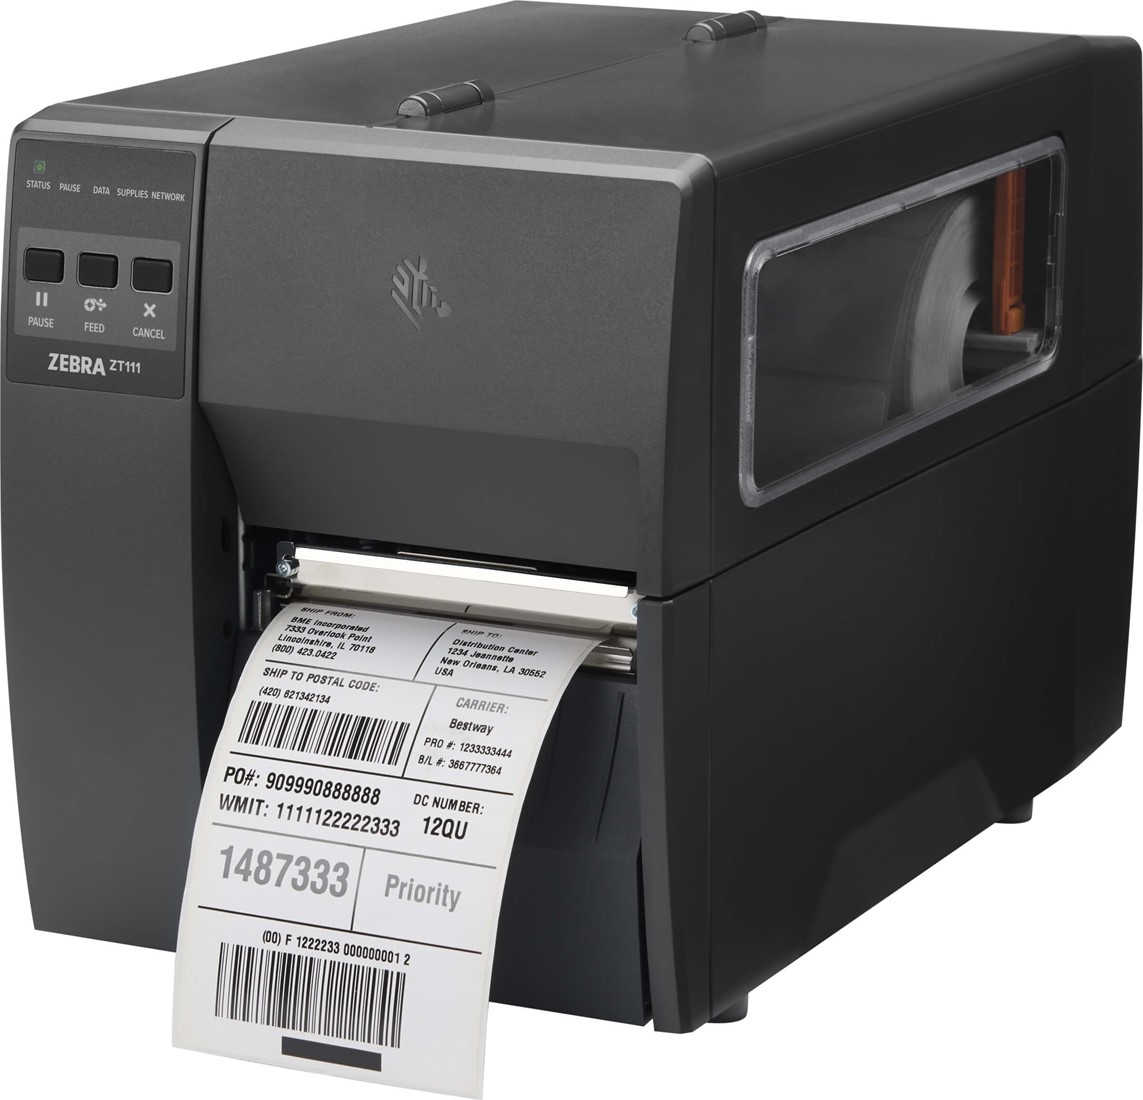 Zebra Zt111 Label Printer Affordable Printing Solution With High Quality Results 4347